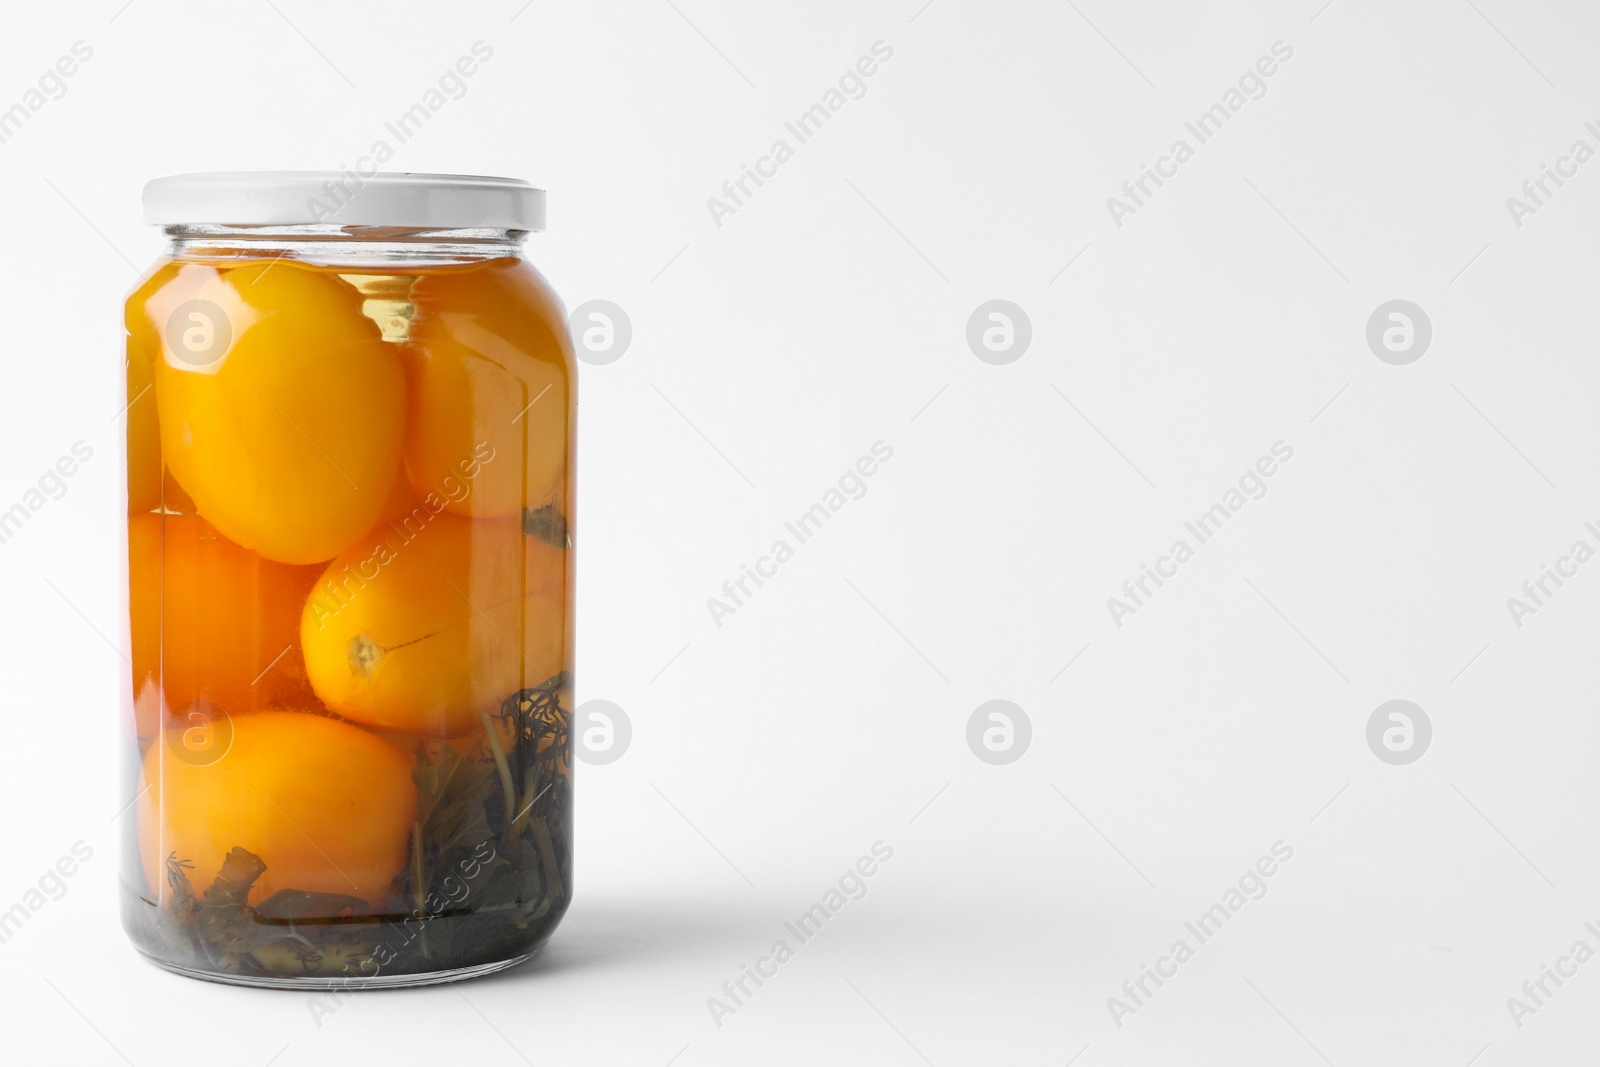 Photo of Jar of pickled yellow tomatoes on white background